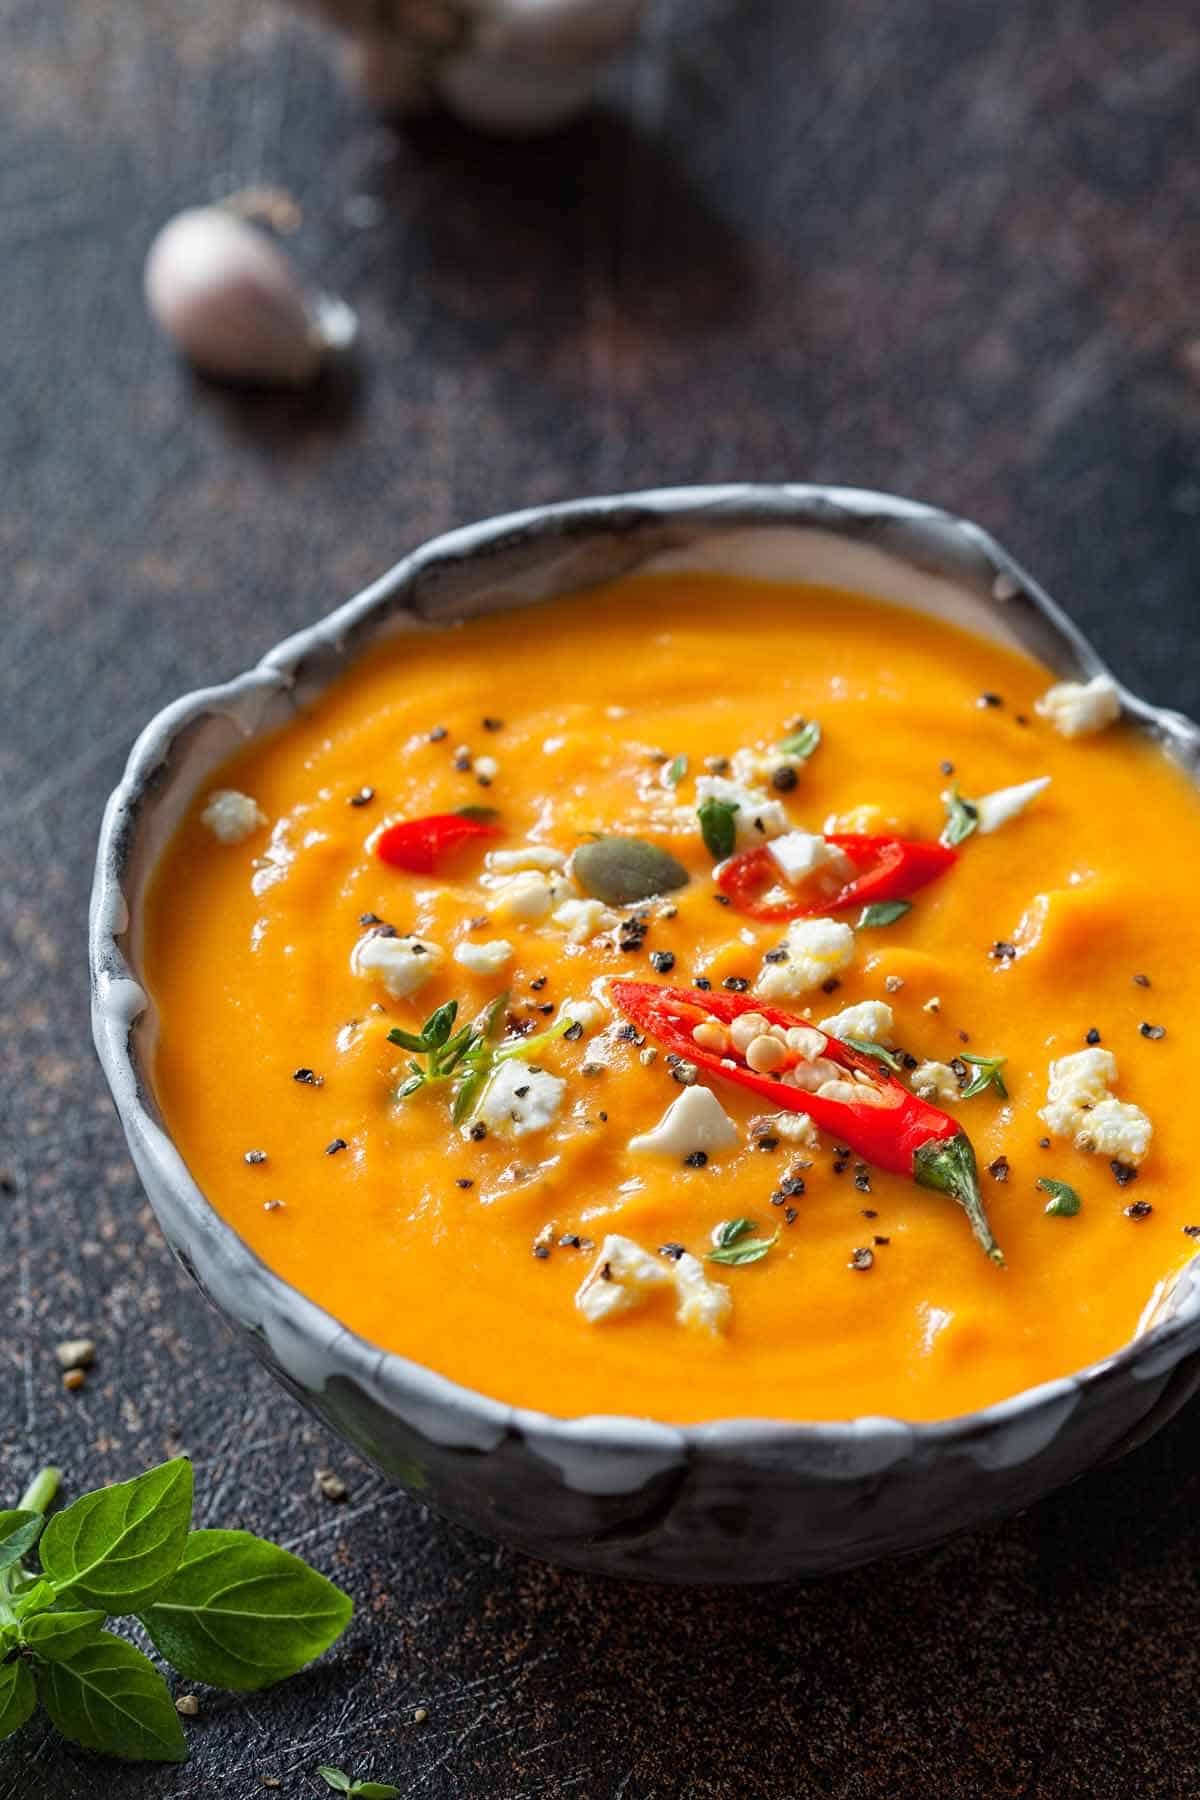 Bowl of pumpkin soup garnished with feta cheese.